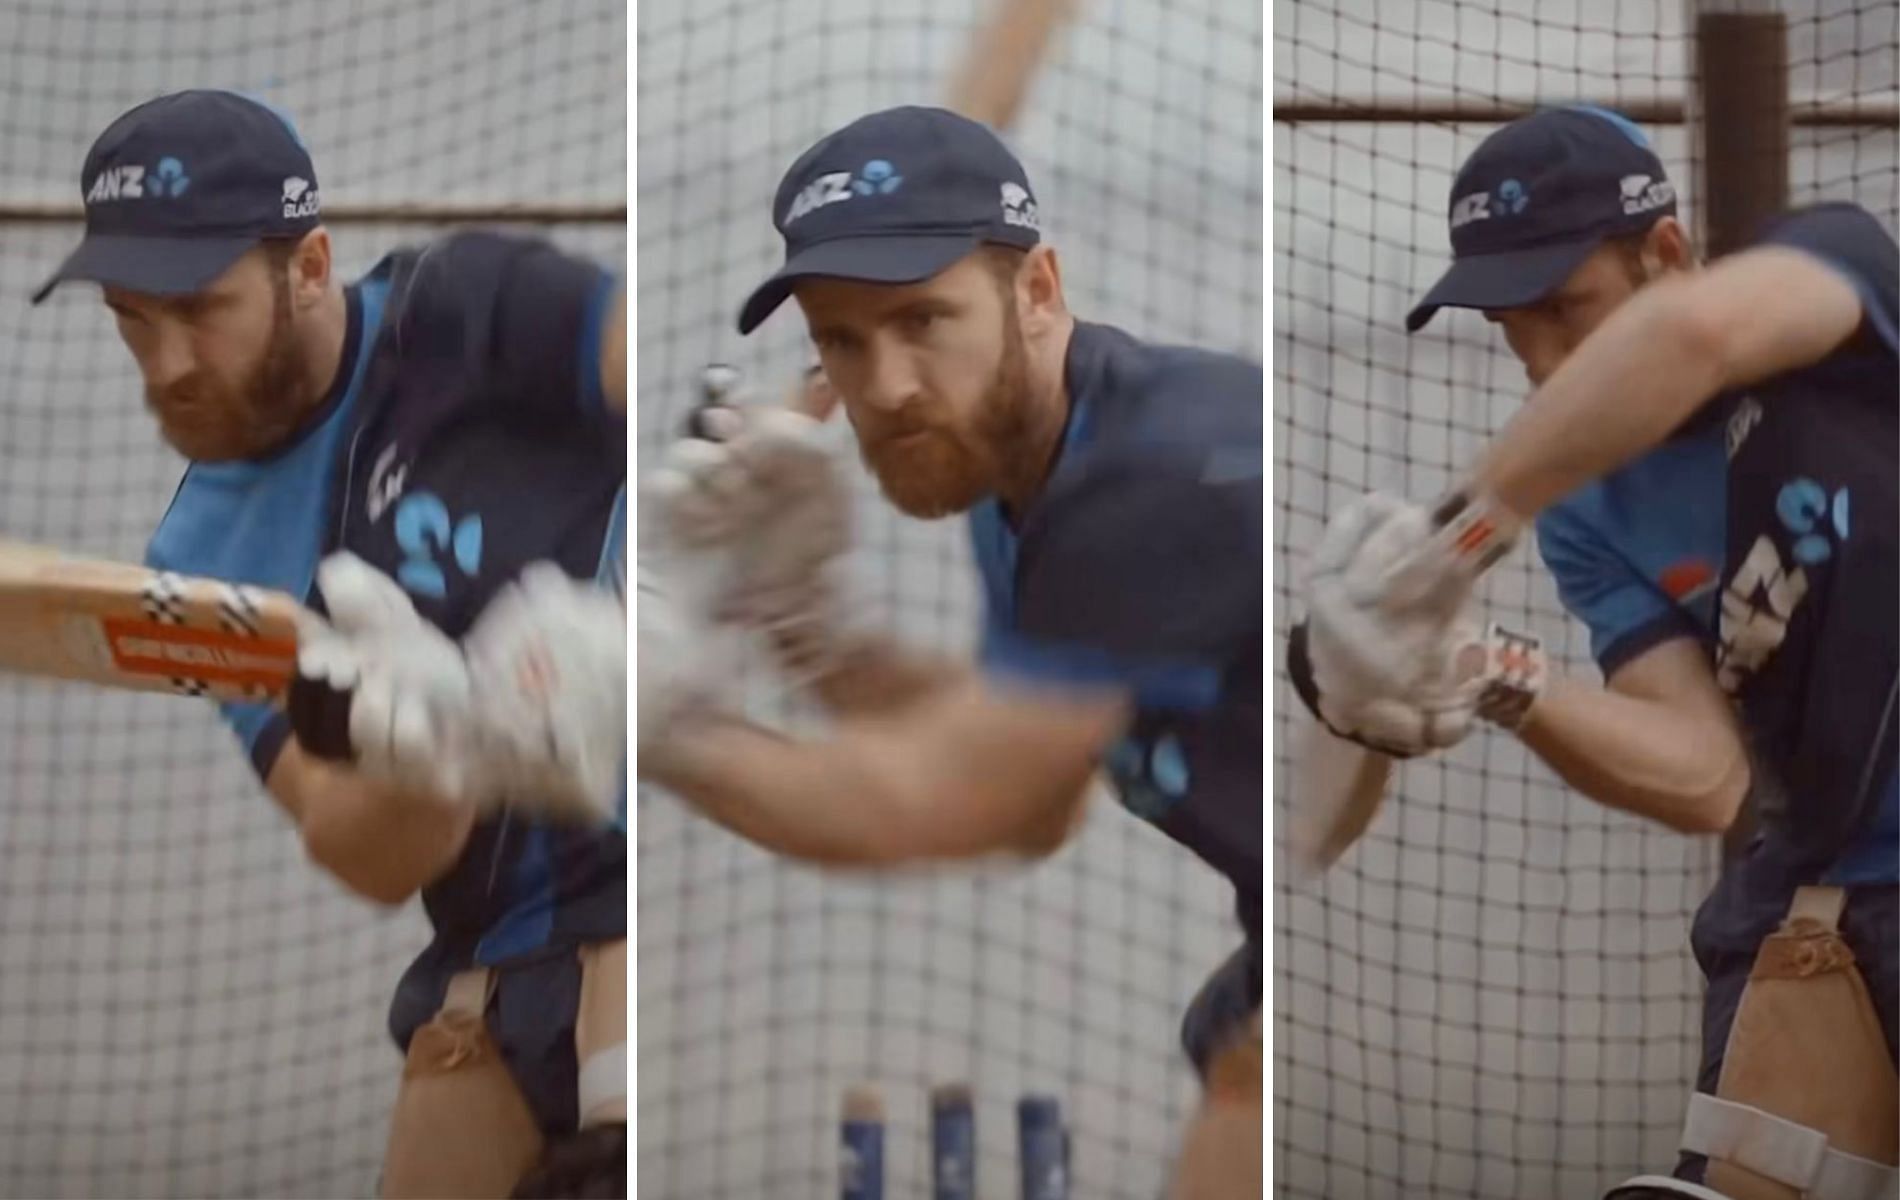 Kane Williamson during a net session. (Pics: Instagram)